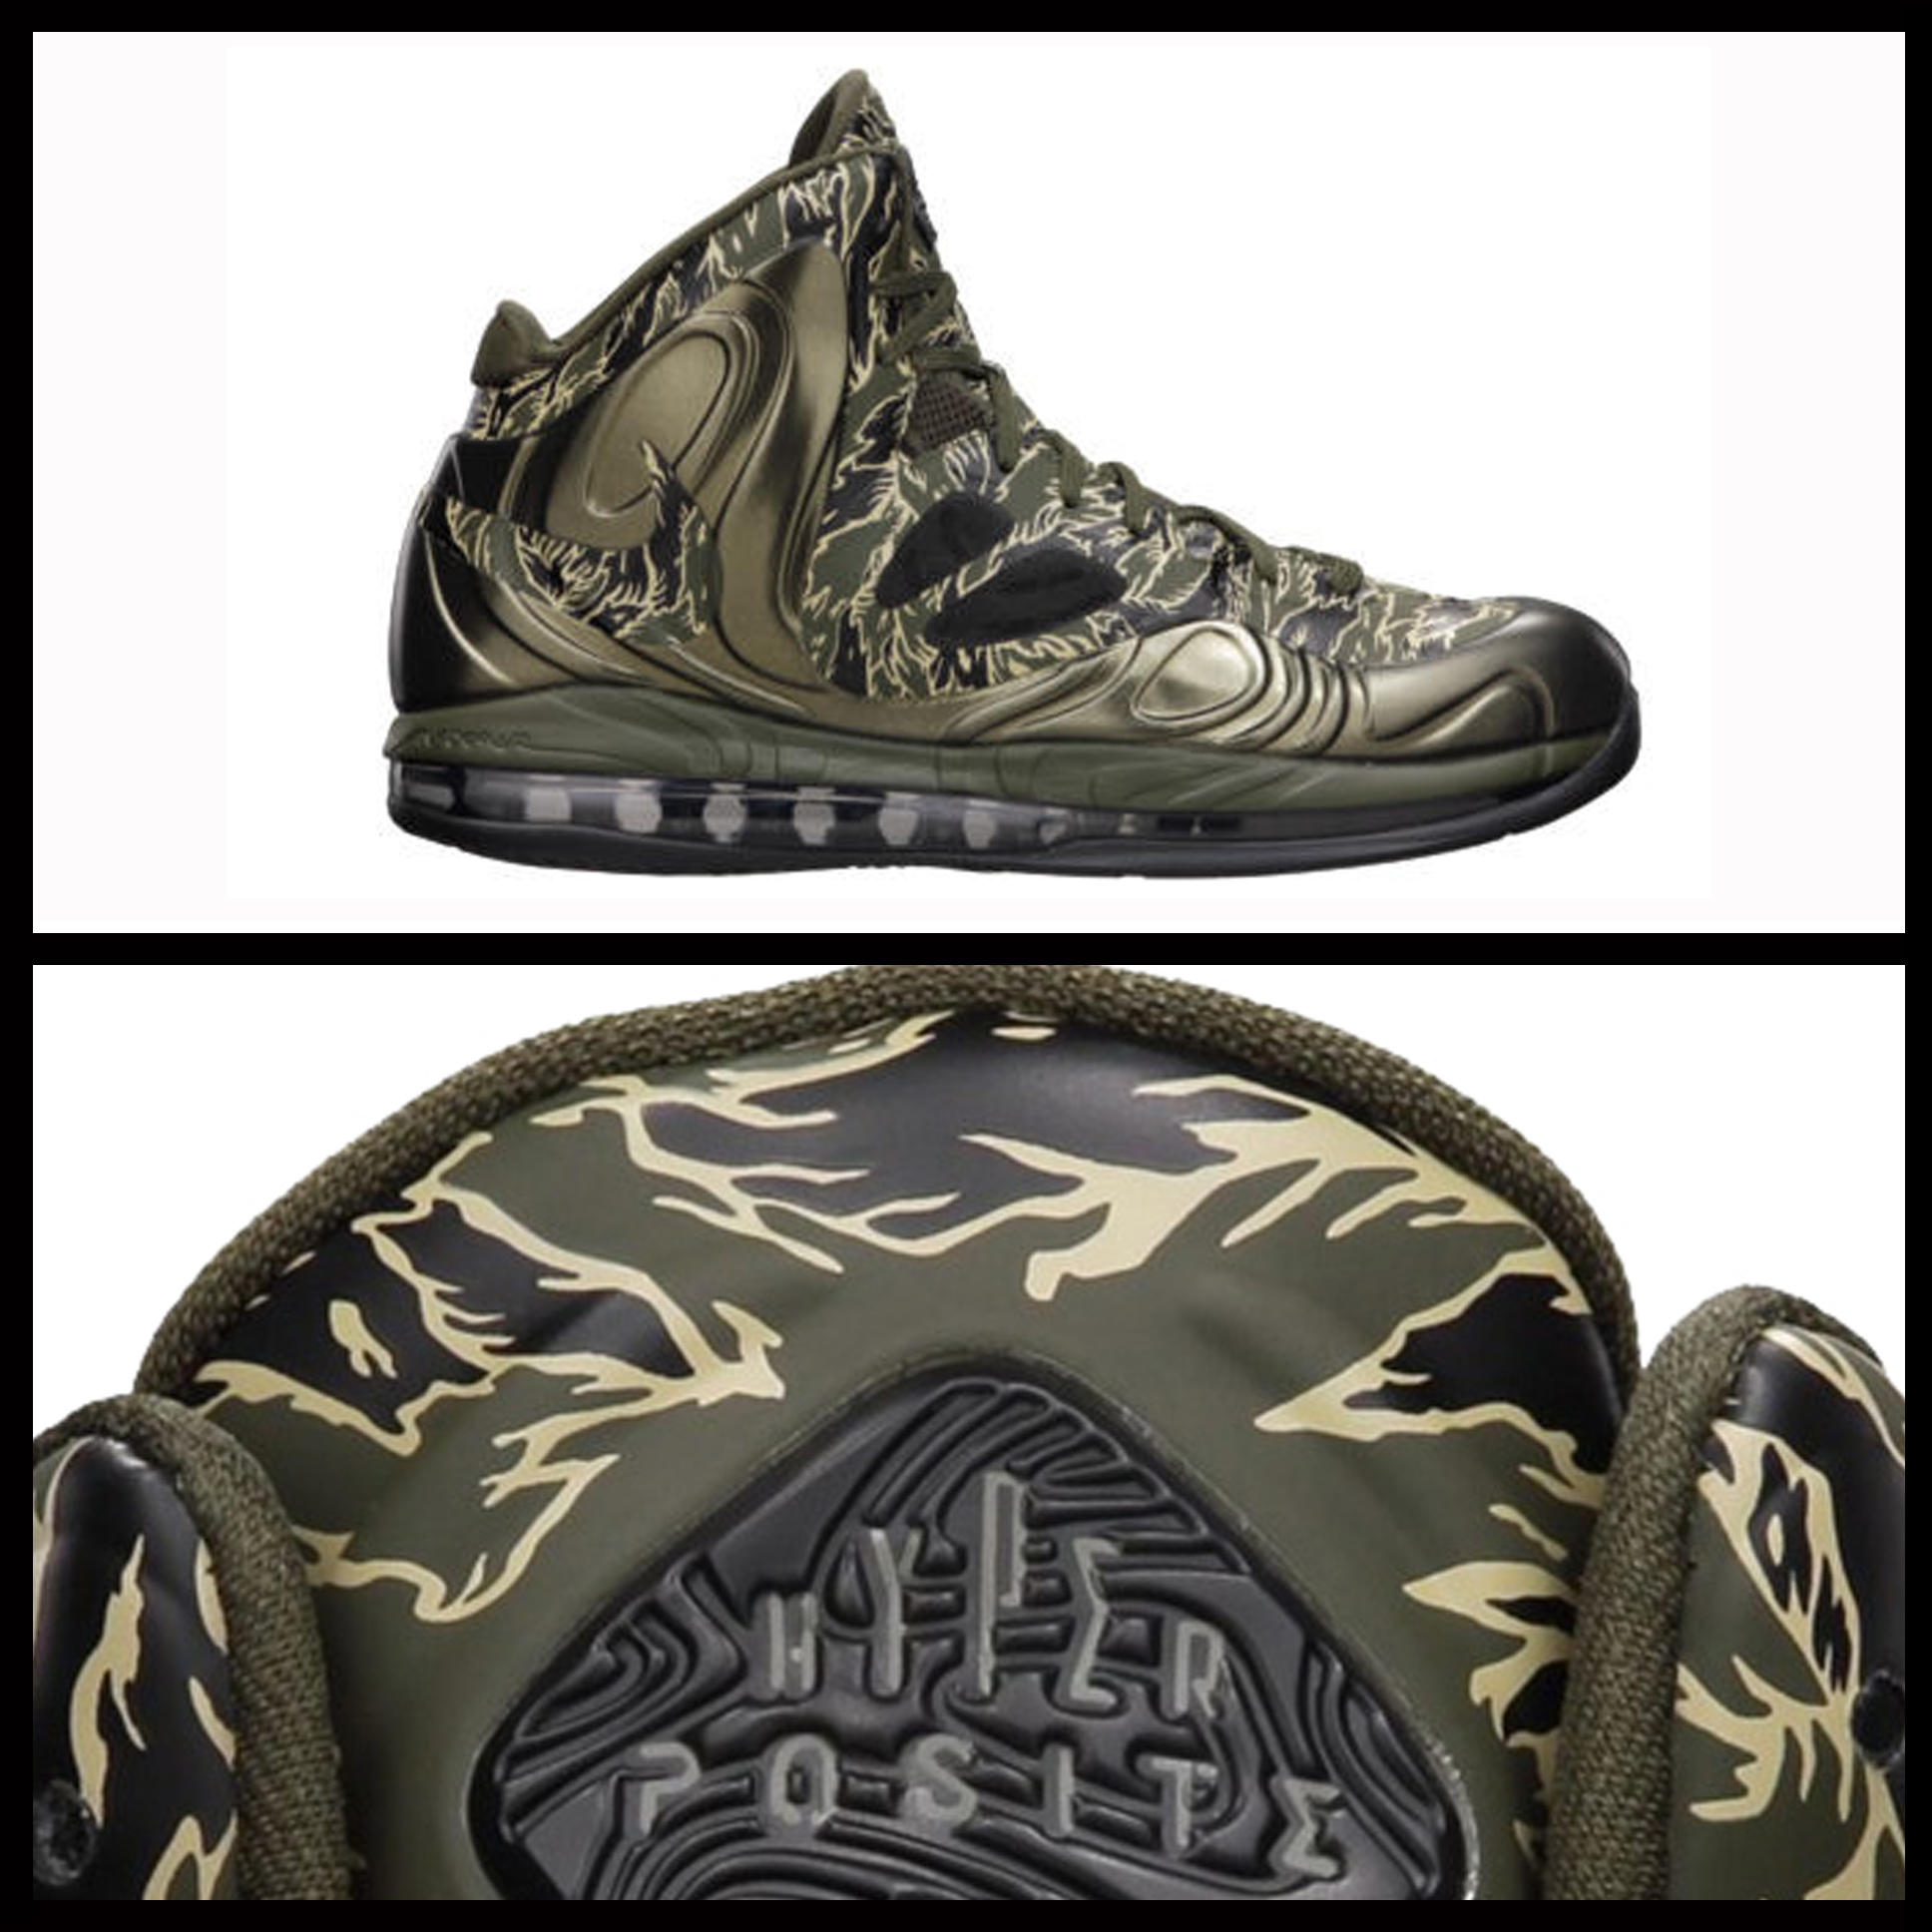 Foot Locker on X: "The Nike Air Max Hyperposite "Cargo Khaki" drops today  at #HouseofHoops for $225. What do you think of this style?  http://t.co/34yW1bmm" / X